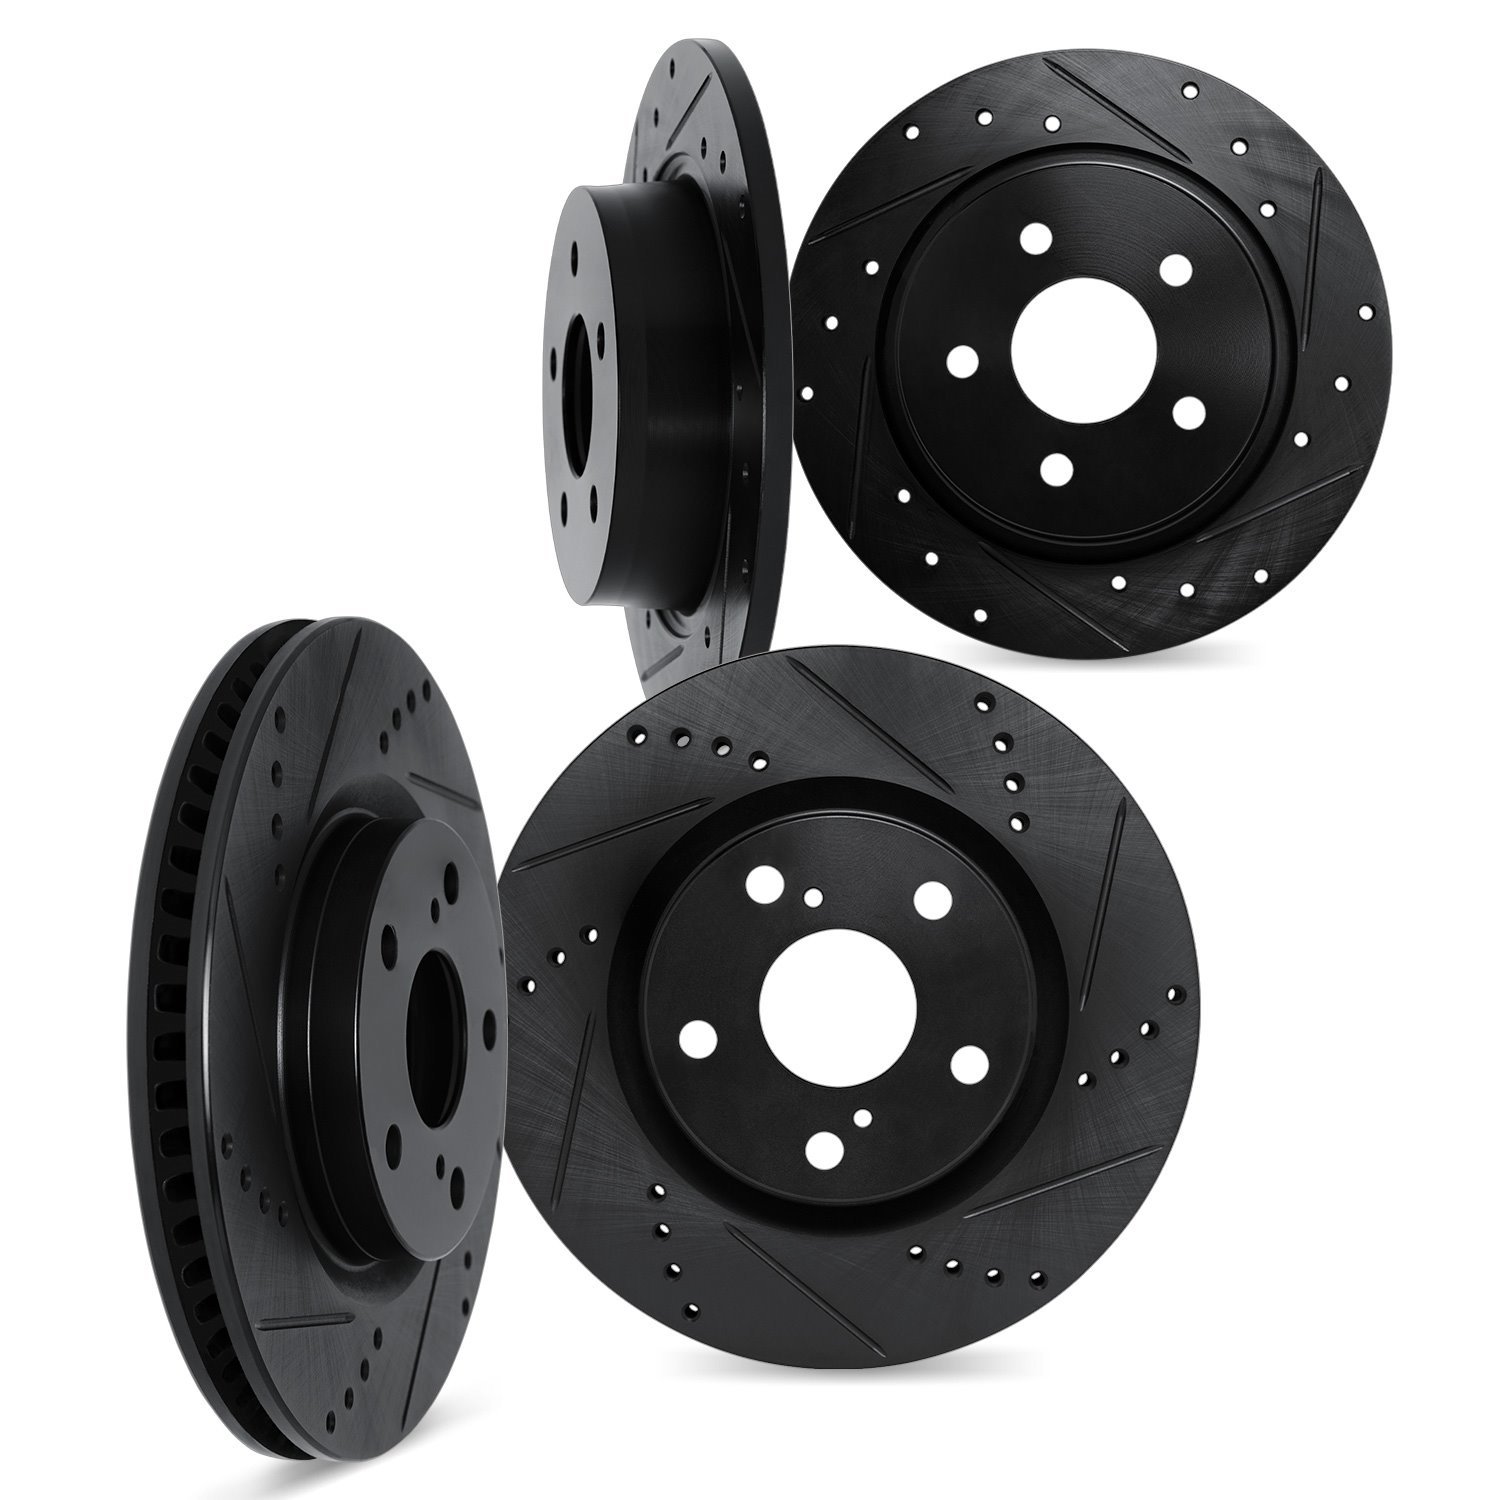 8004-58020 Drilled/Slotted Brake Rotors [Black], 2014-2020 Acura/Honda, Position: Front and Rear